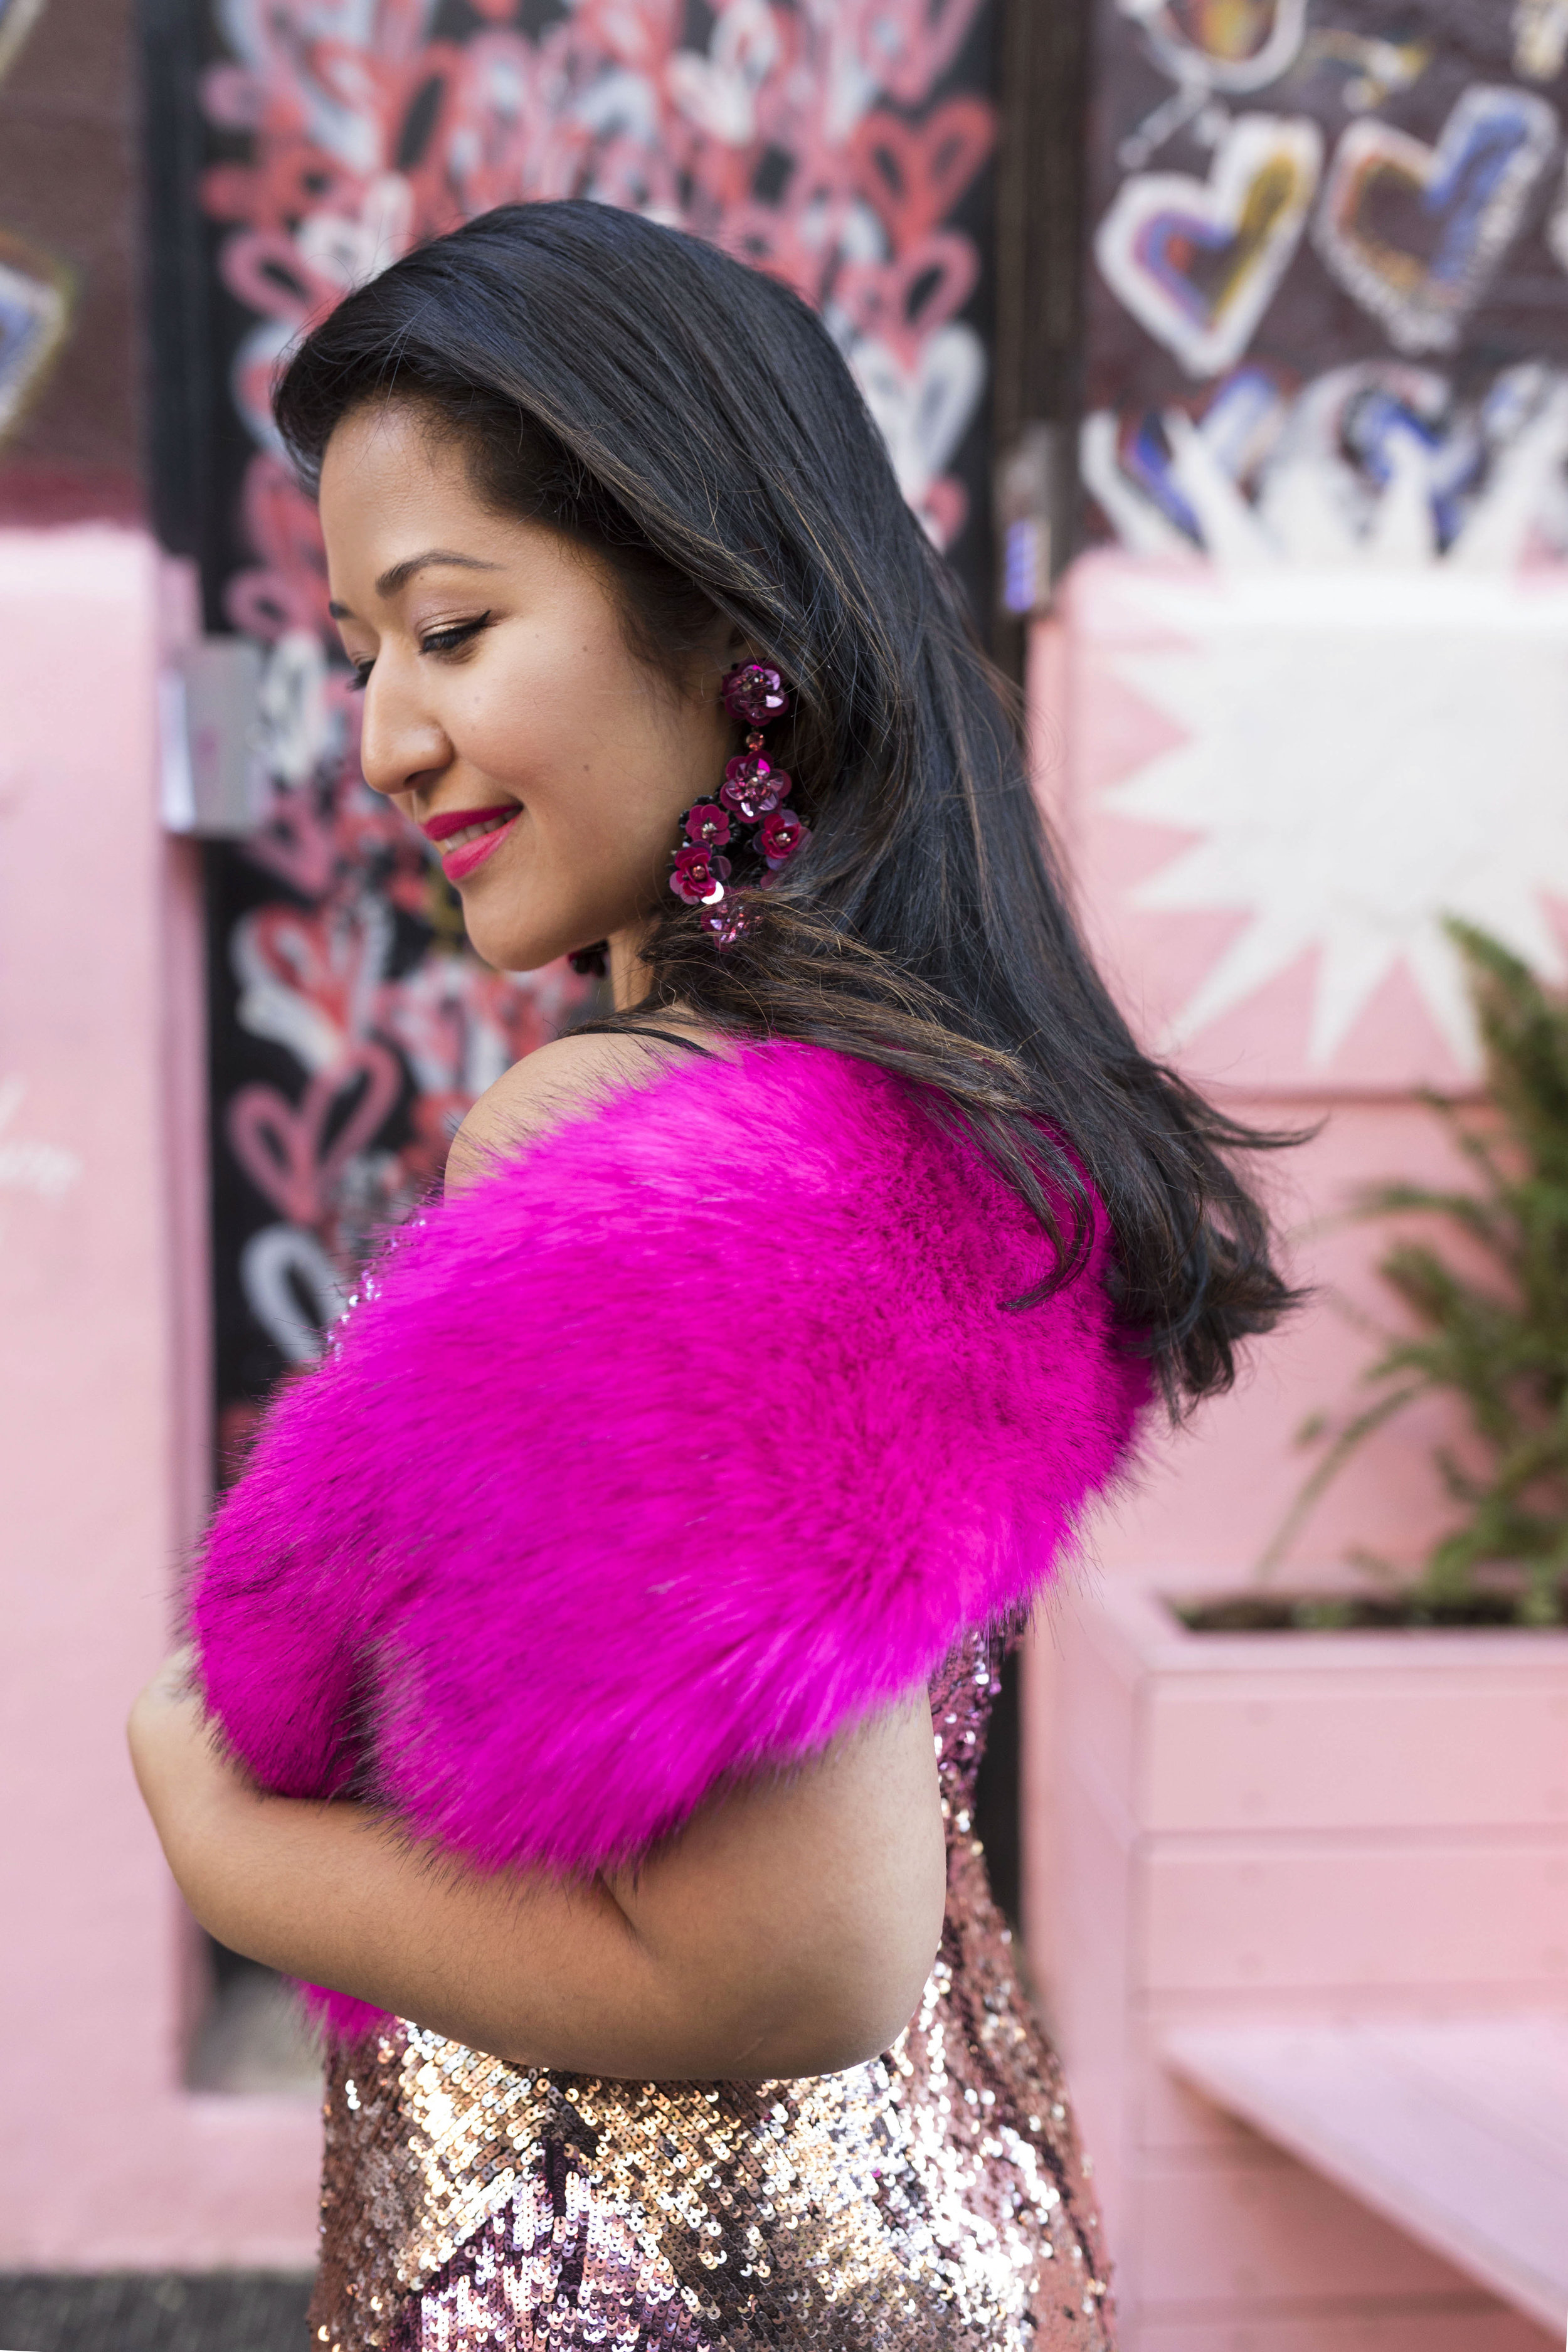 Krity S x New Years Eve Outfit x Aidan Mattox Color Block Pink Sequin Short Dress with Forever 21 Faux Fur Scarf 7.jpg